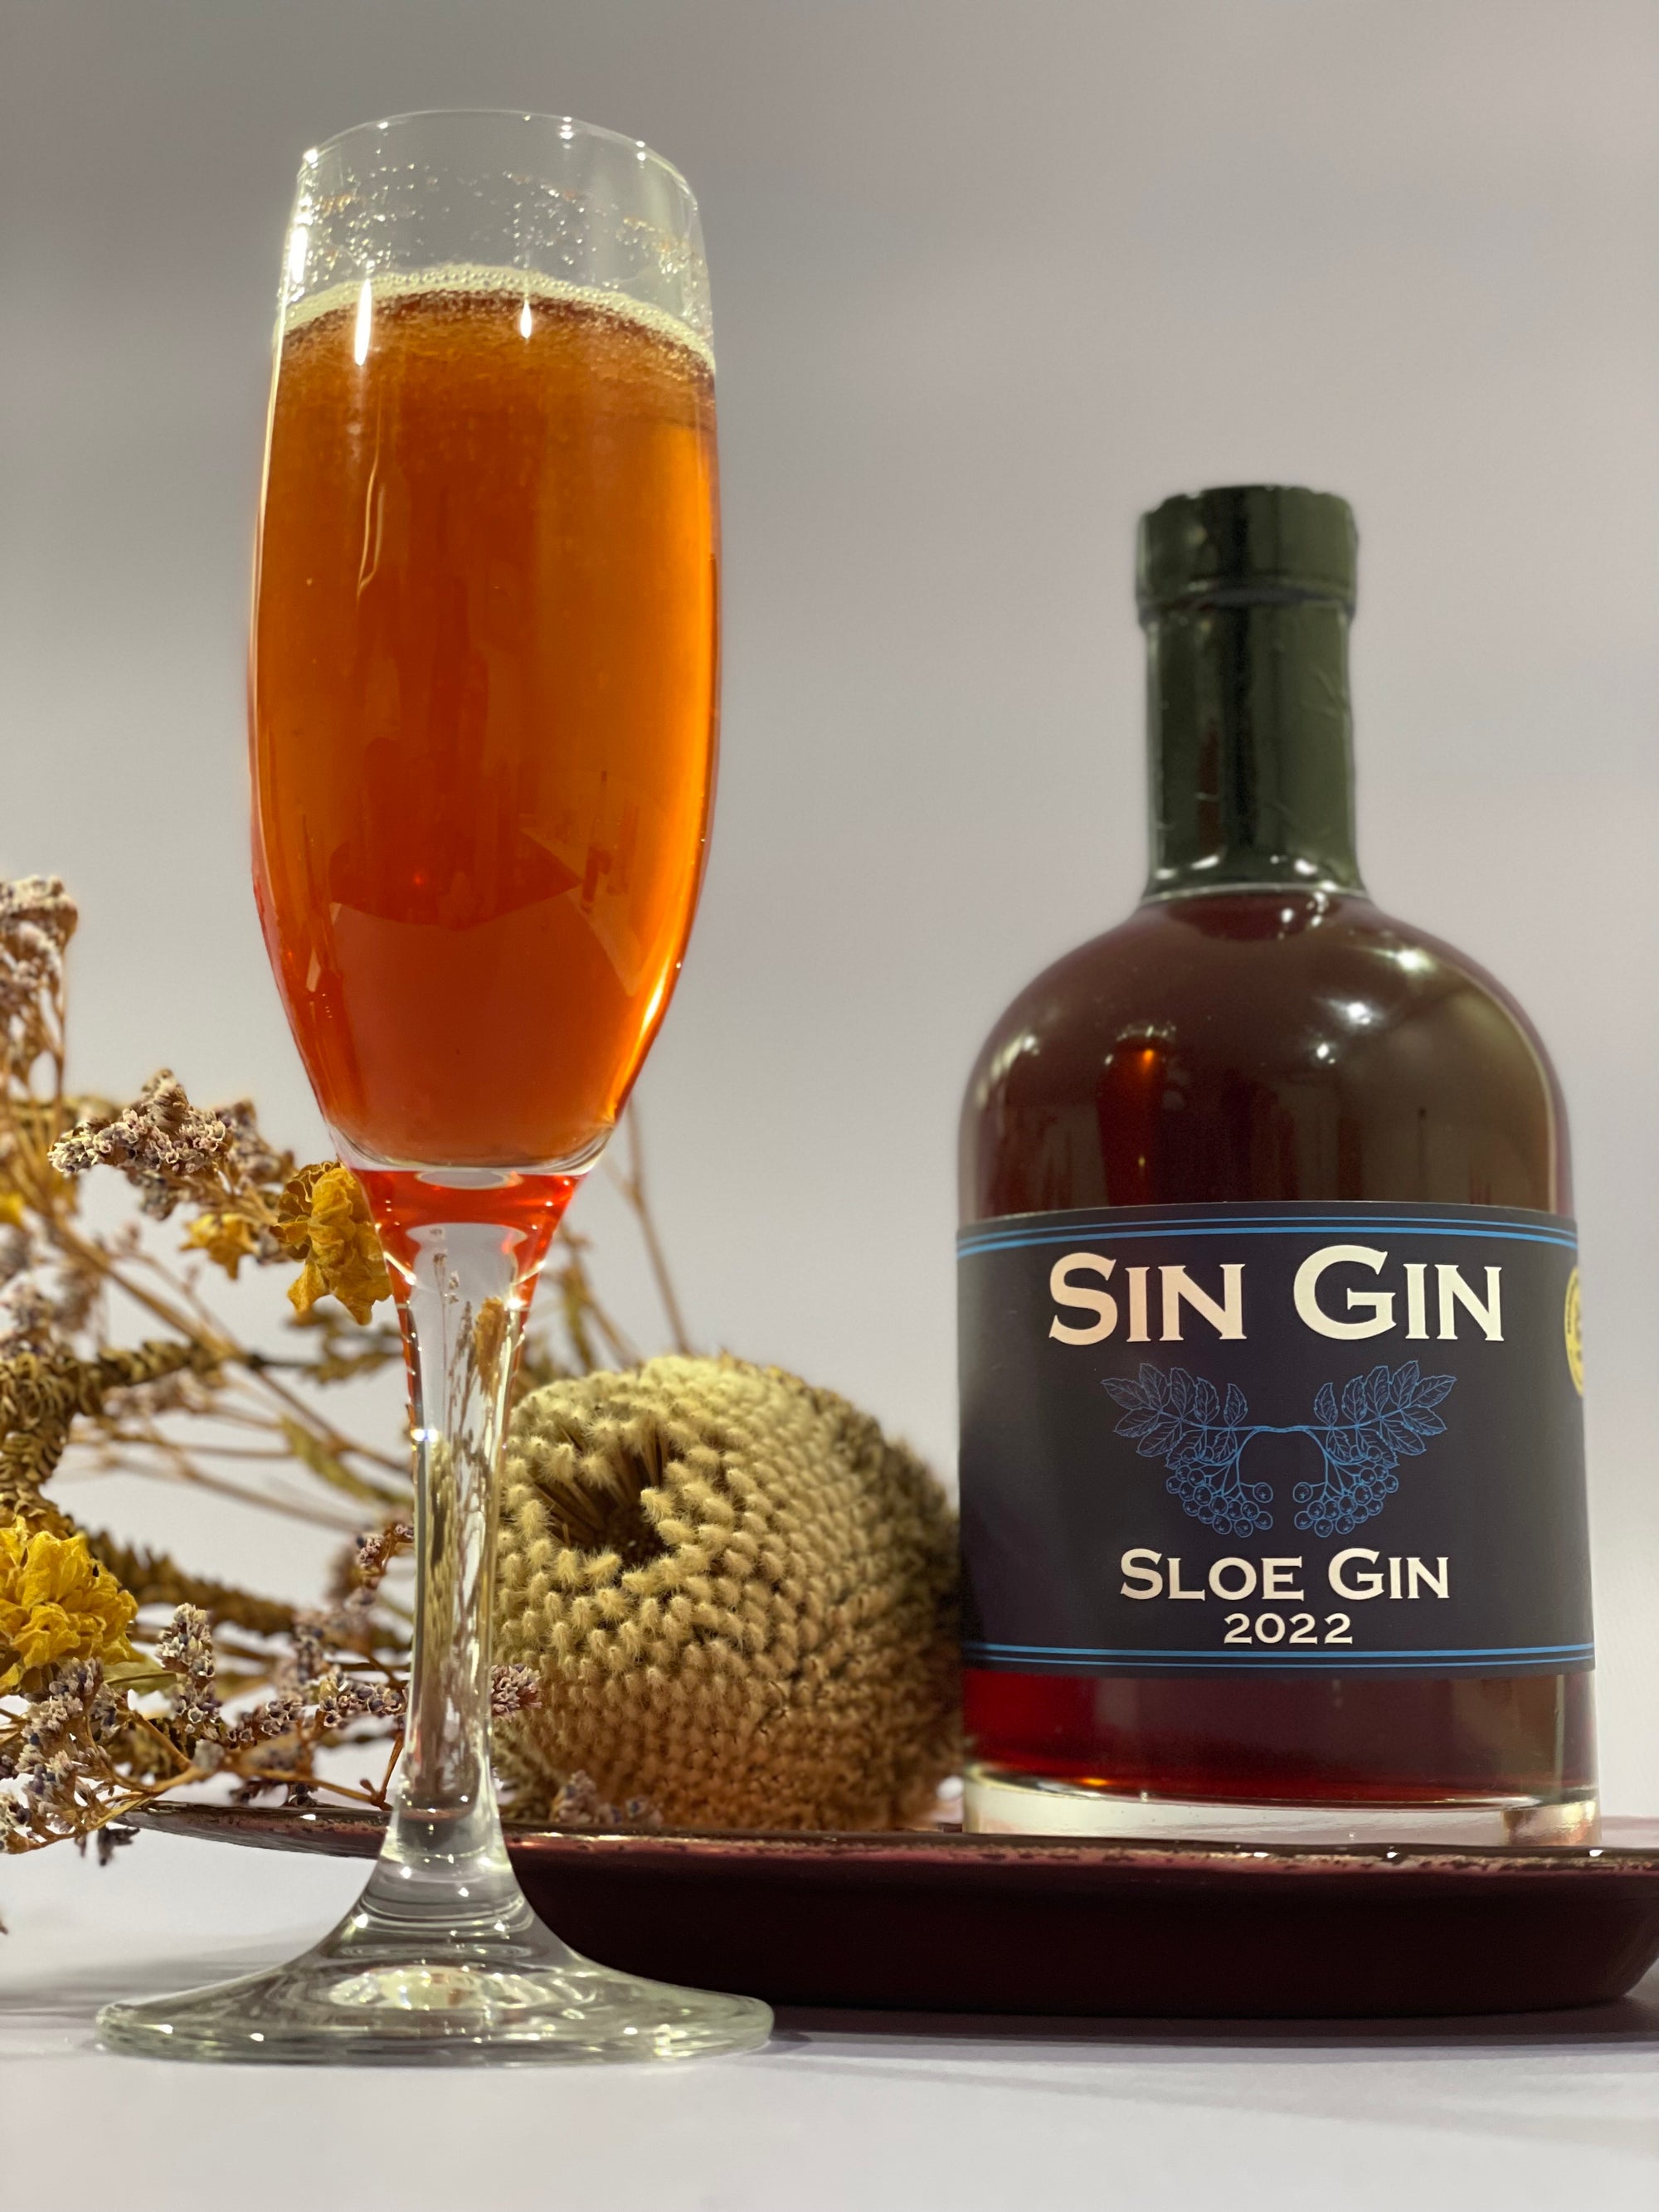 Warm up with Sloe this winter!